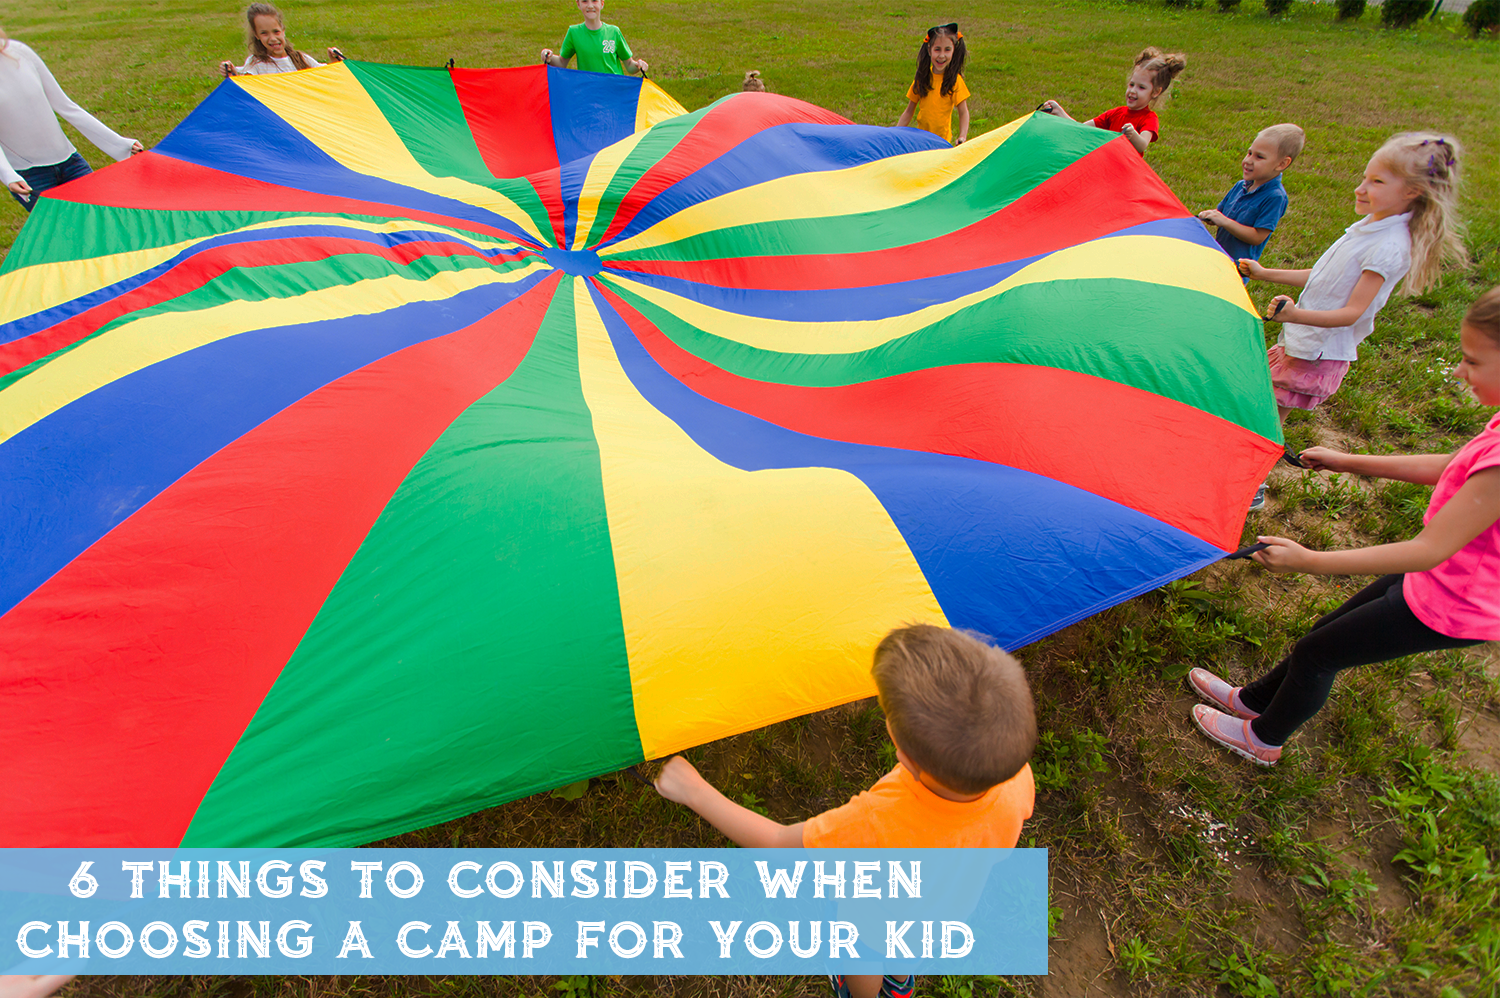 Kids at a day camp playing with a rainbow colored parachute outside.